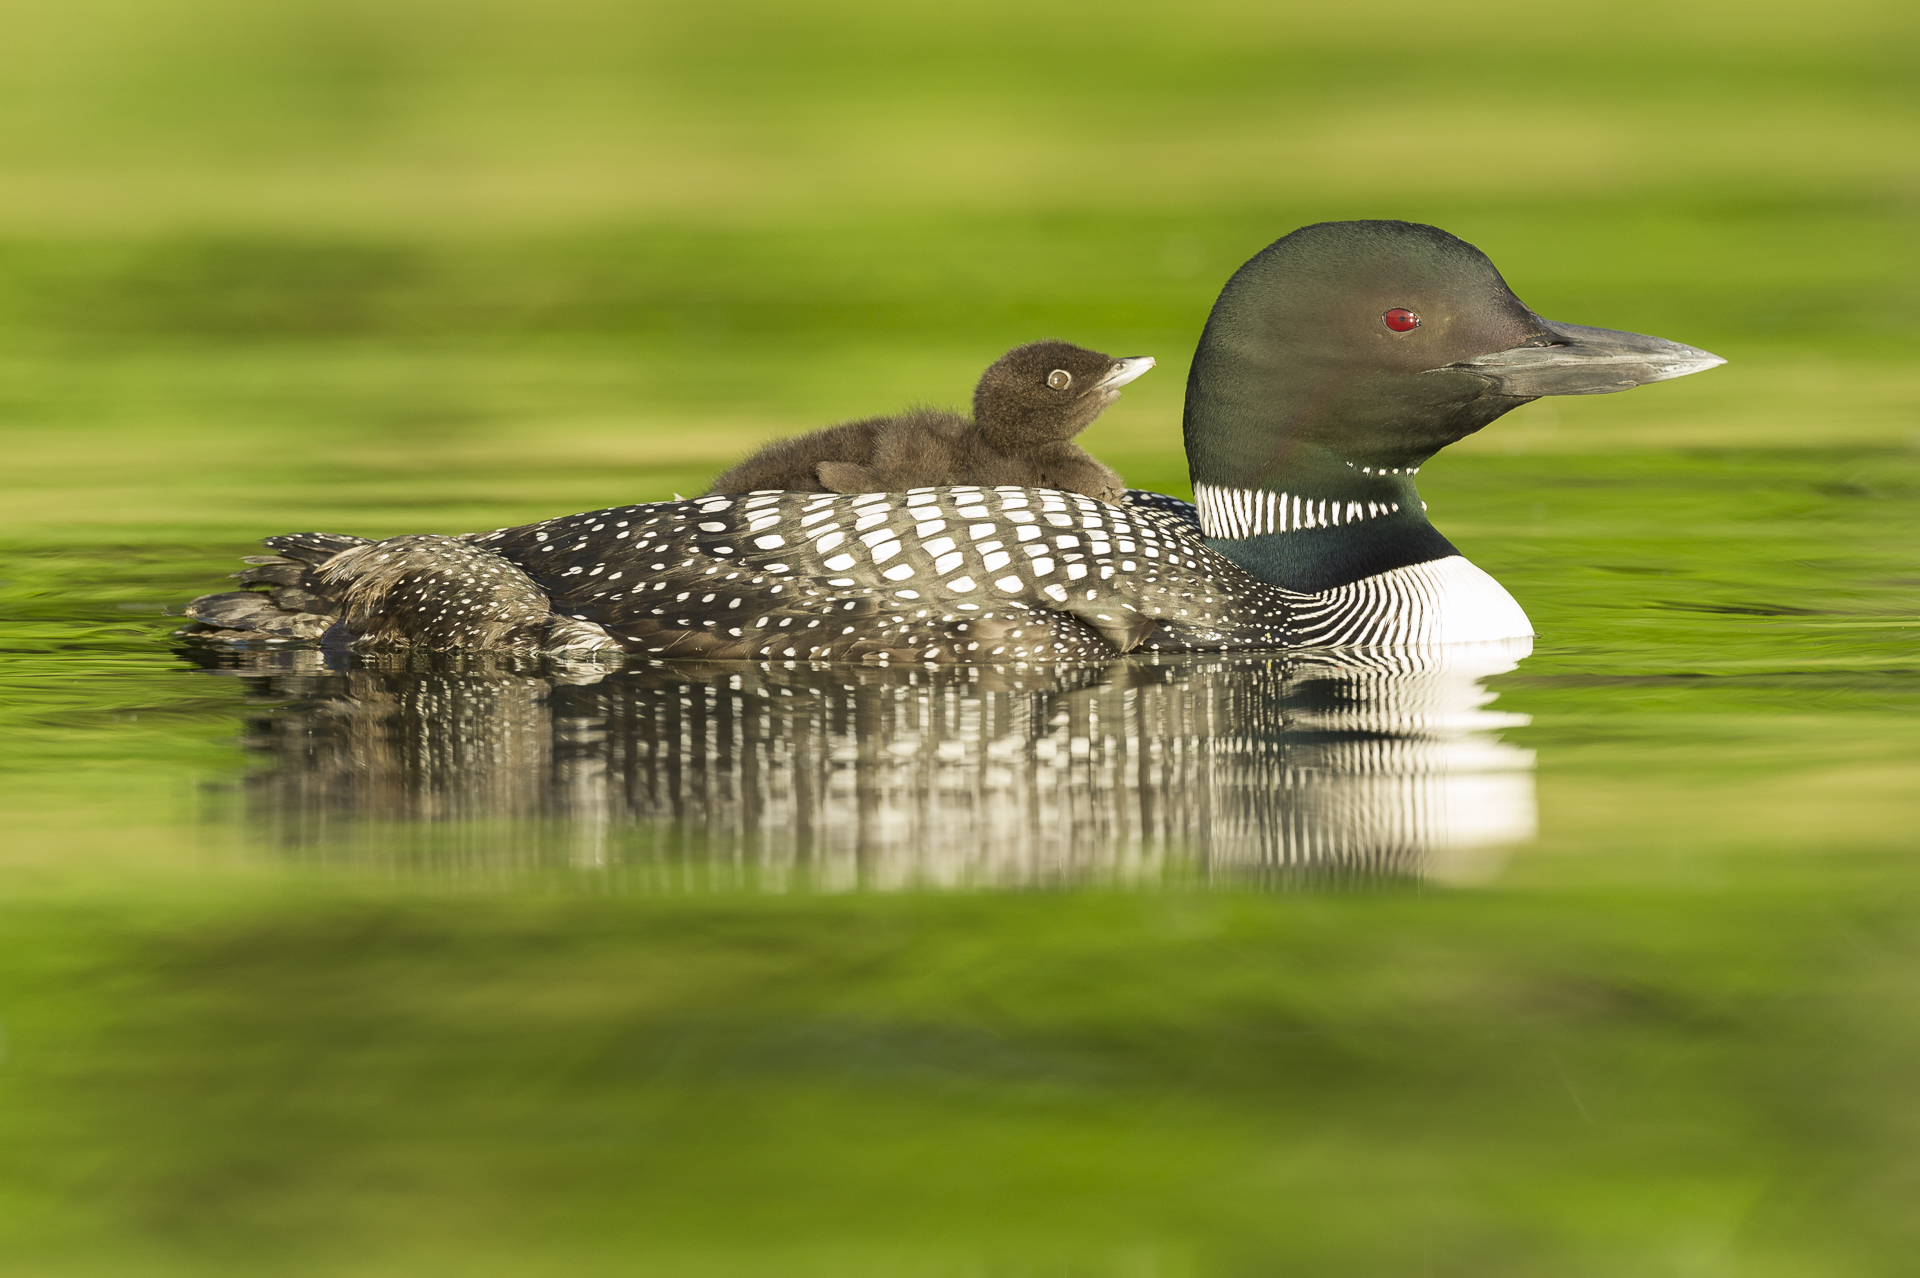 Lil' hitchhiker: common loon